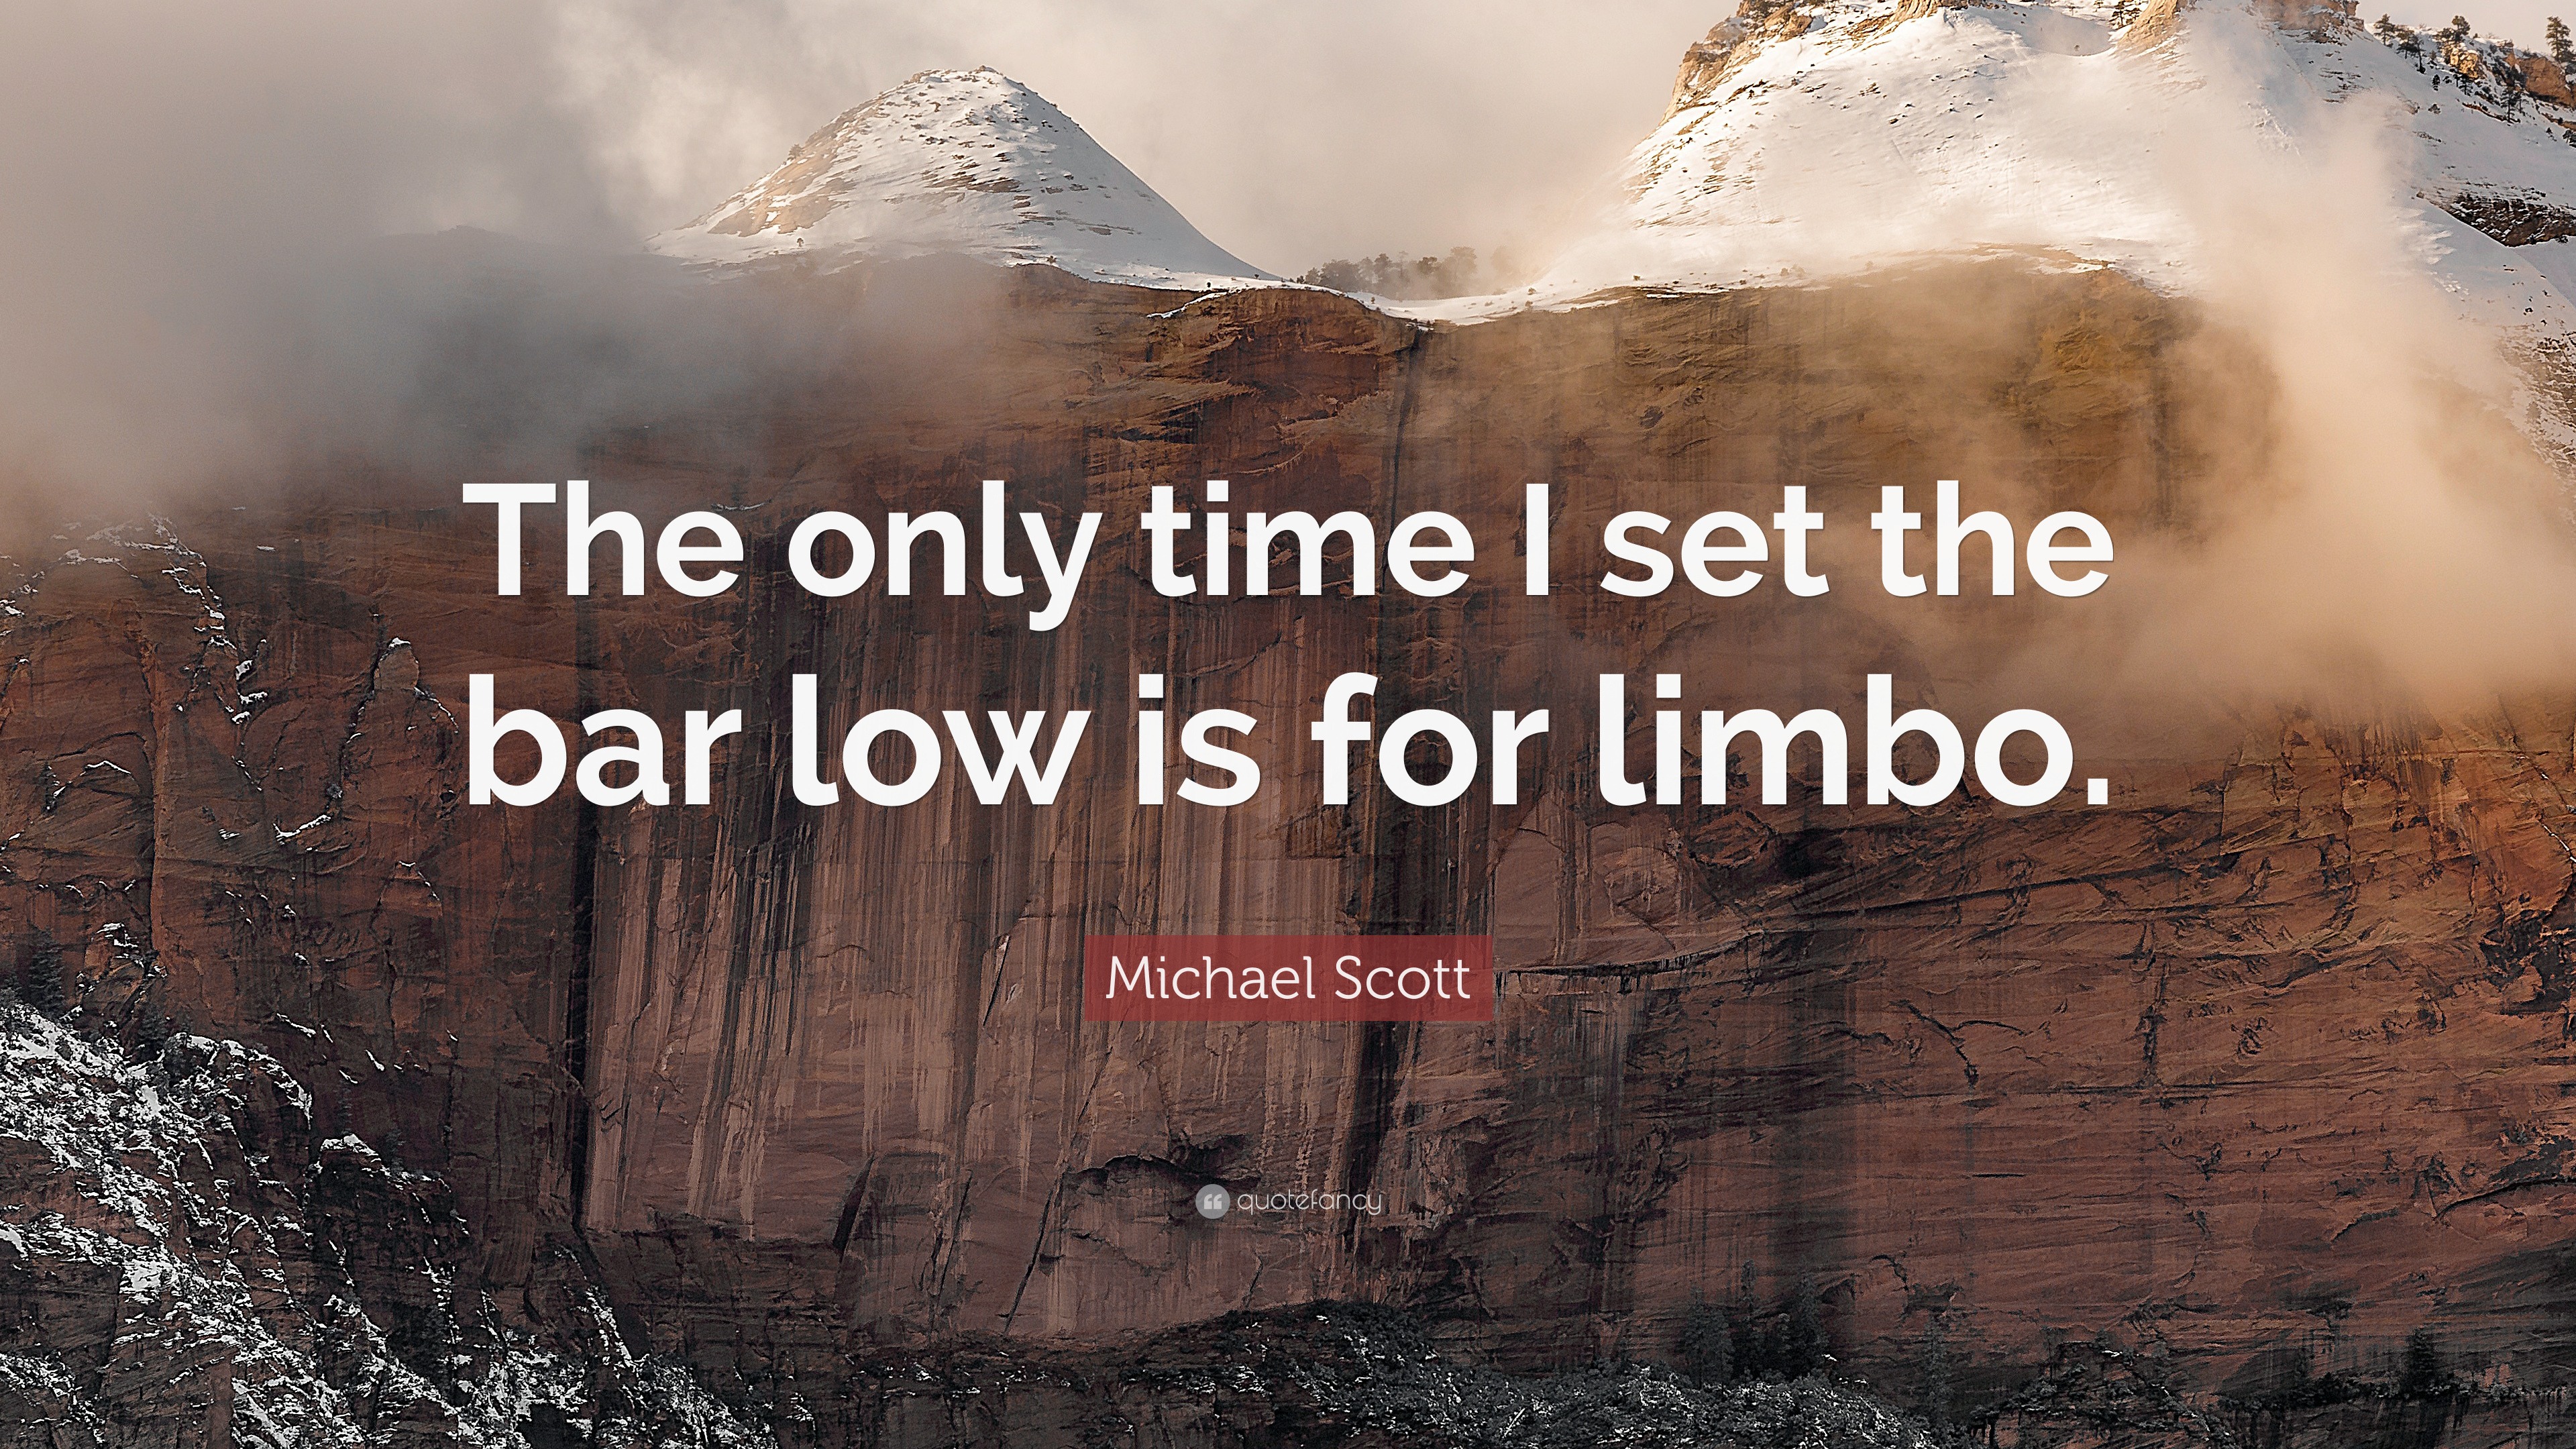 Michael Scott Quote: “The only time I set the bar low is for limbo